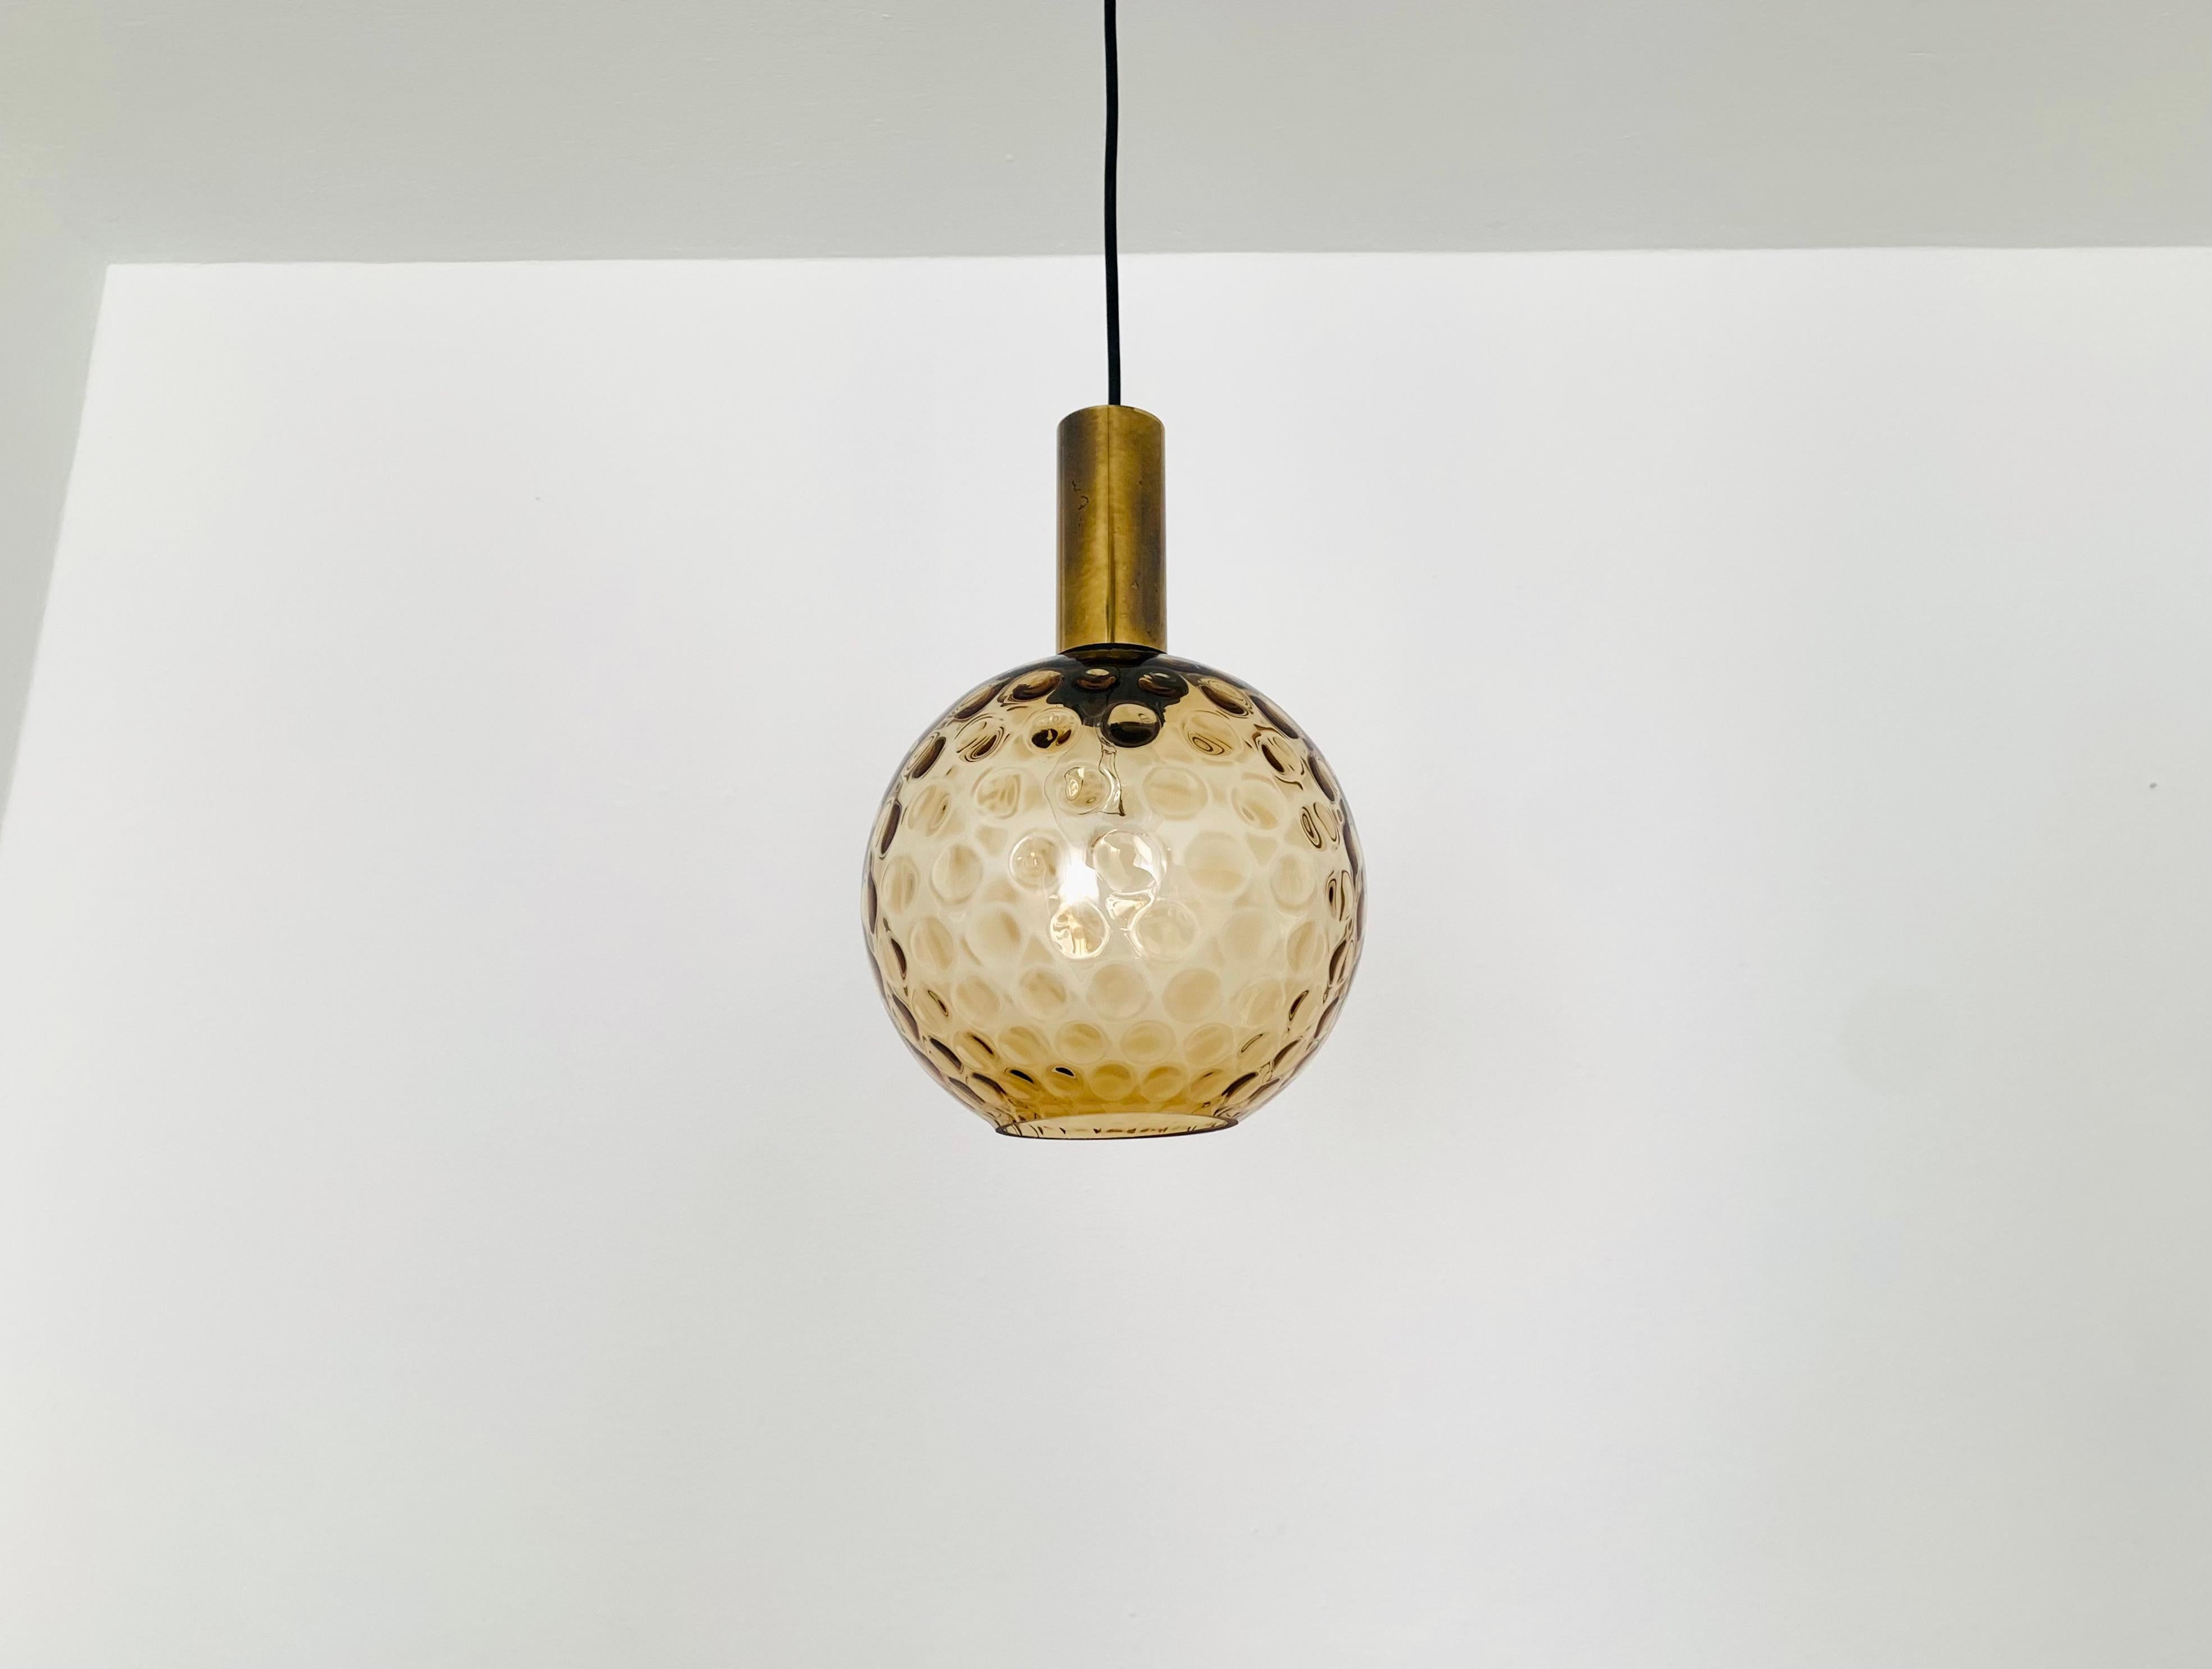 Wonderful bubble glass pendant lamp from the 1960s.
The lamp spreads a great play of light in the room and enchants with its charisma.
Great high-quality workmanship and extraordinary design.

Condition:

Very good vintage condition with slight